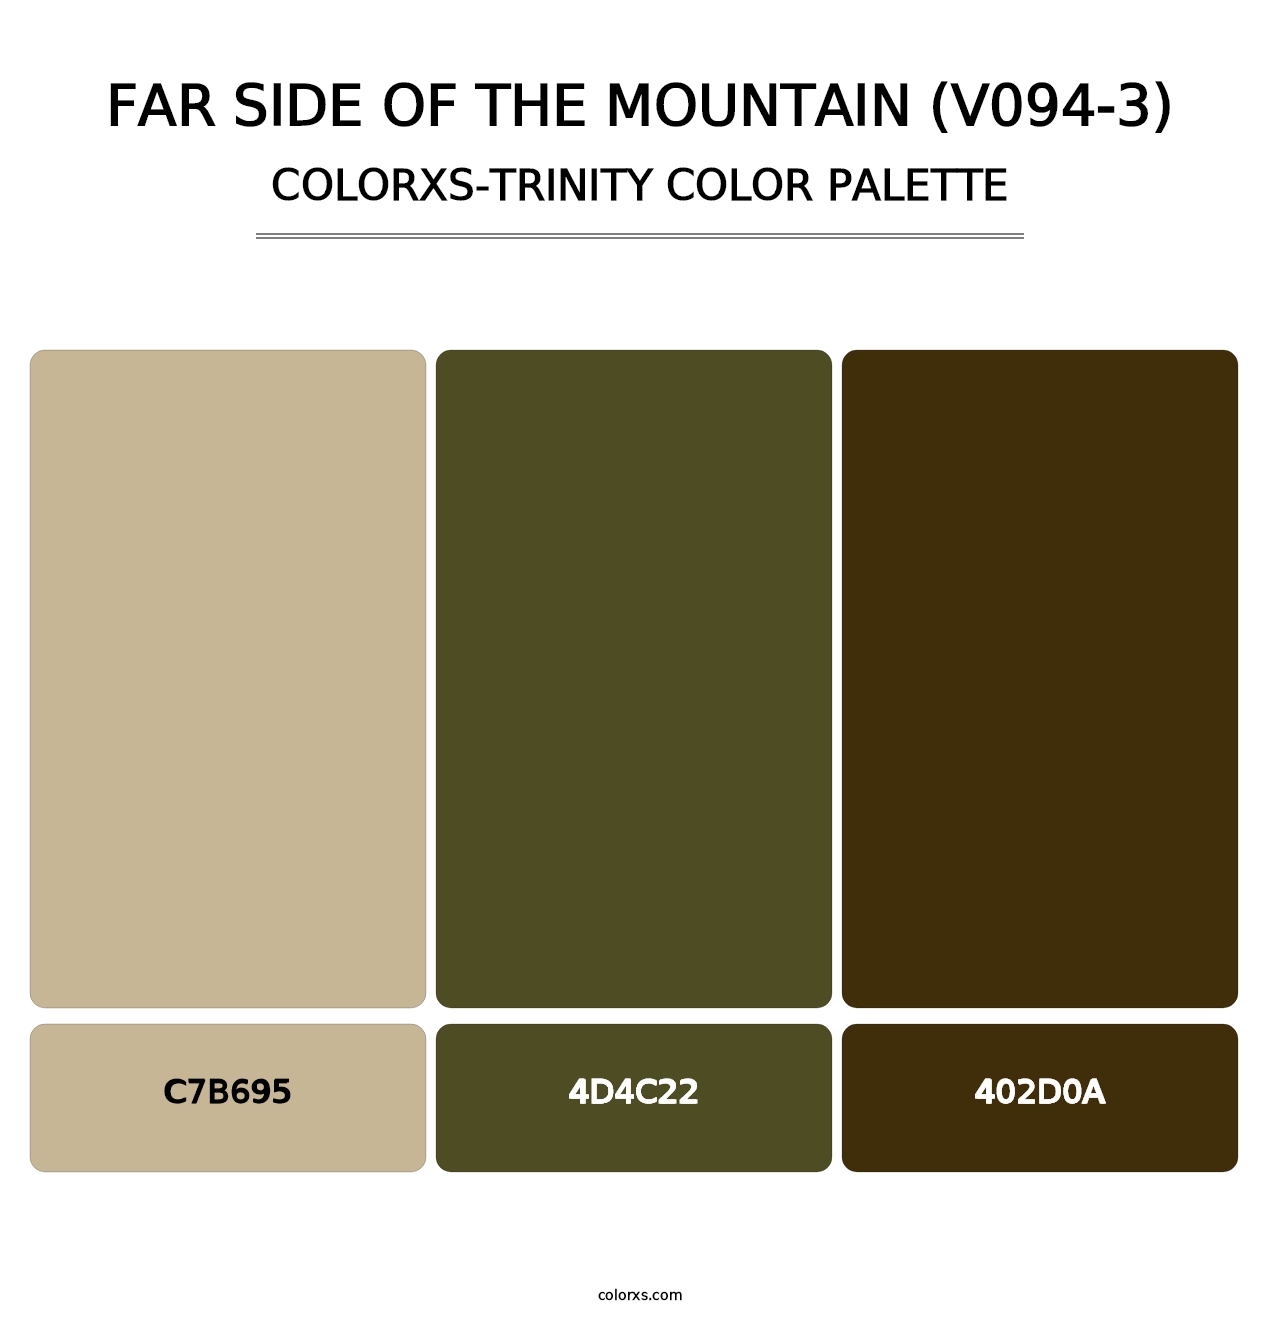 Far Side of the Mountain (V094-3) - Colorxs Trinity Palette